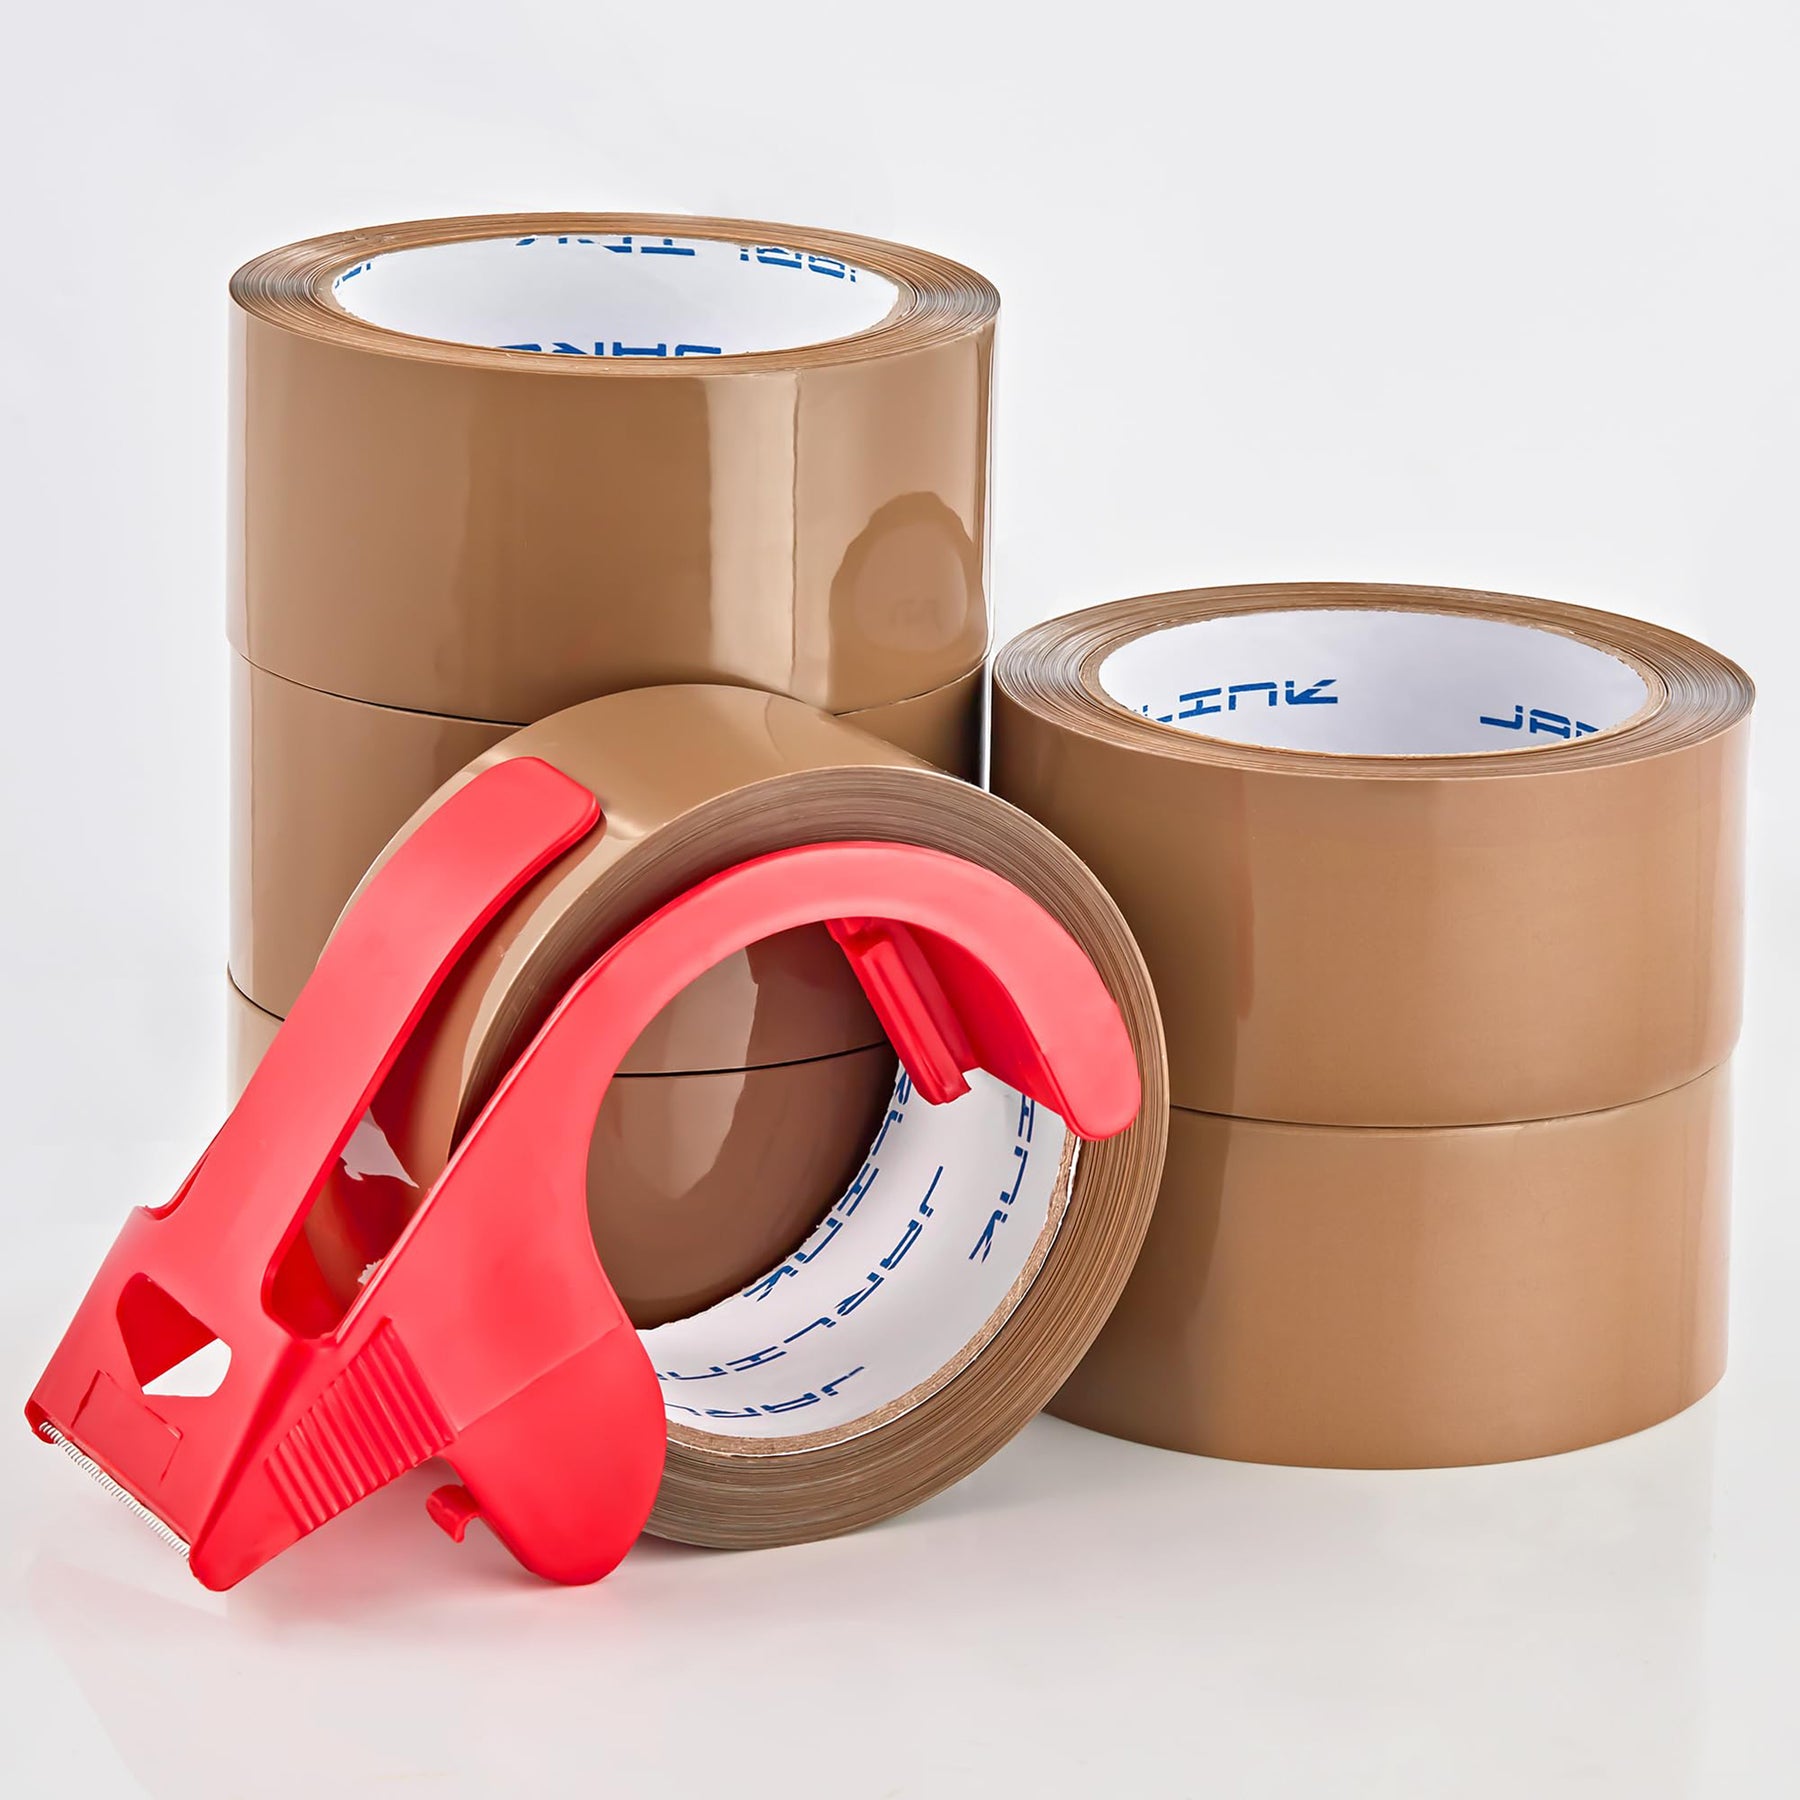 JARLINK Upgraded Version Clearer Packing Tape 12 Rolls, Heavy Duty Pac